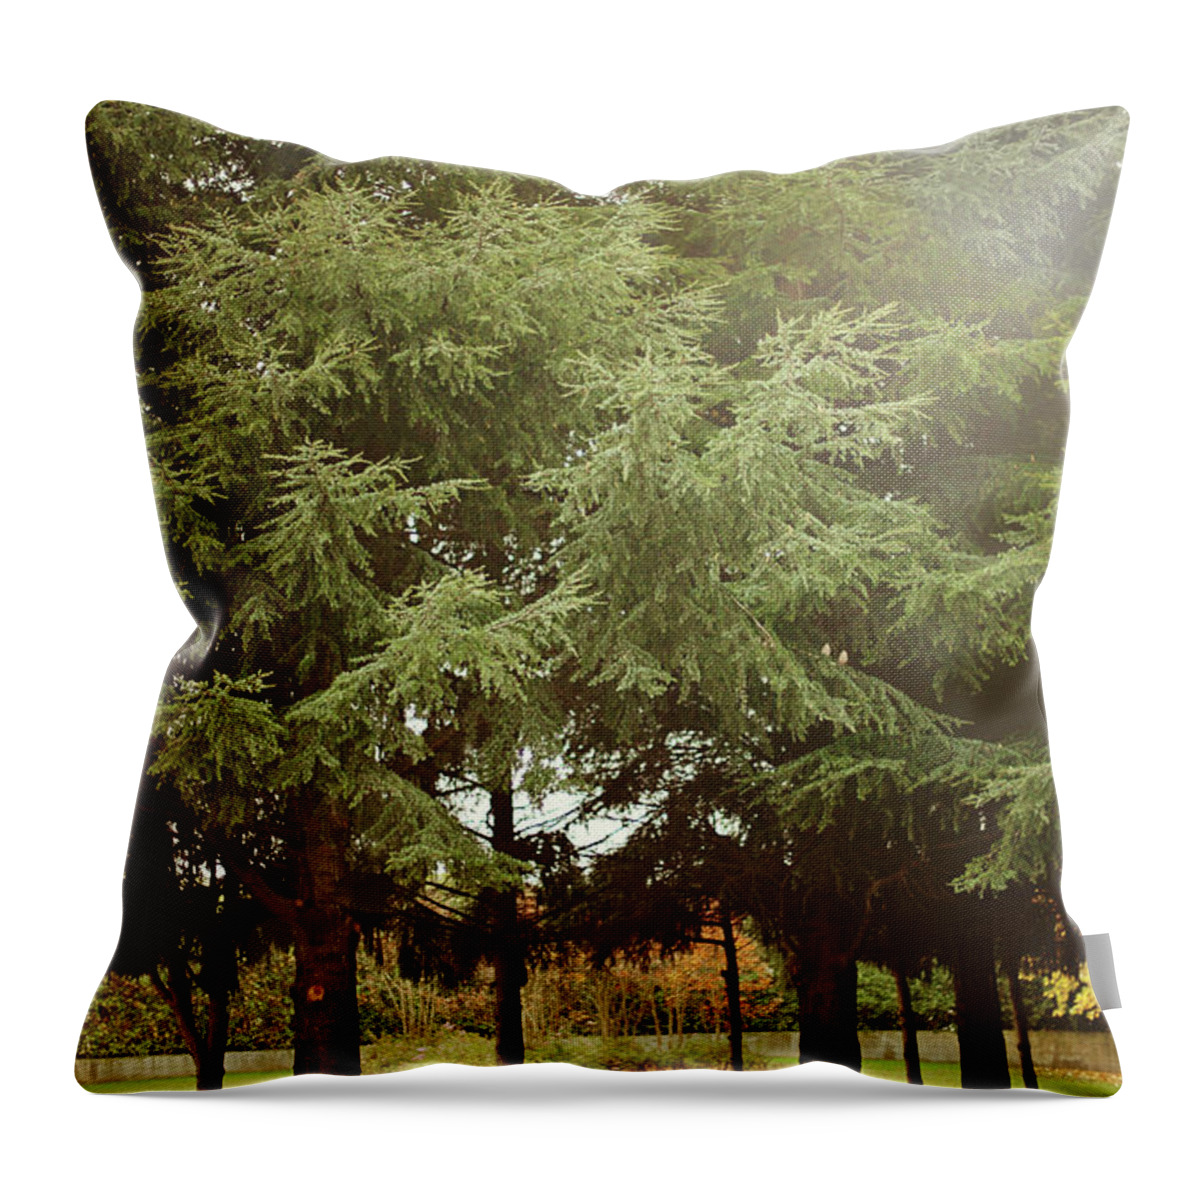 Tranquility Throw Pillow featuring the photograph Mountain Bench Amongst Spruce Trees by Les Hirondelles Photography